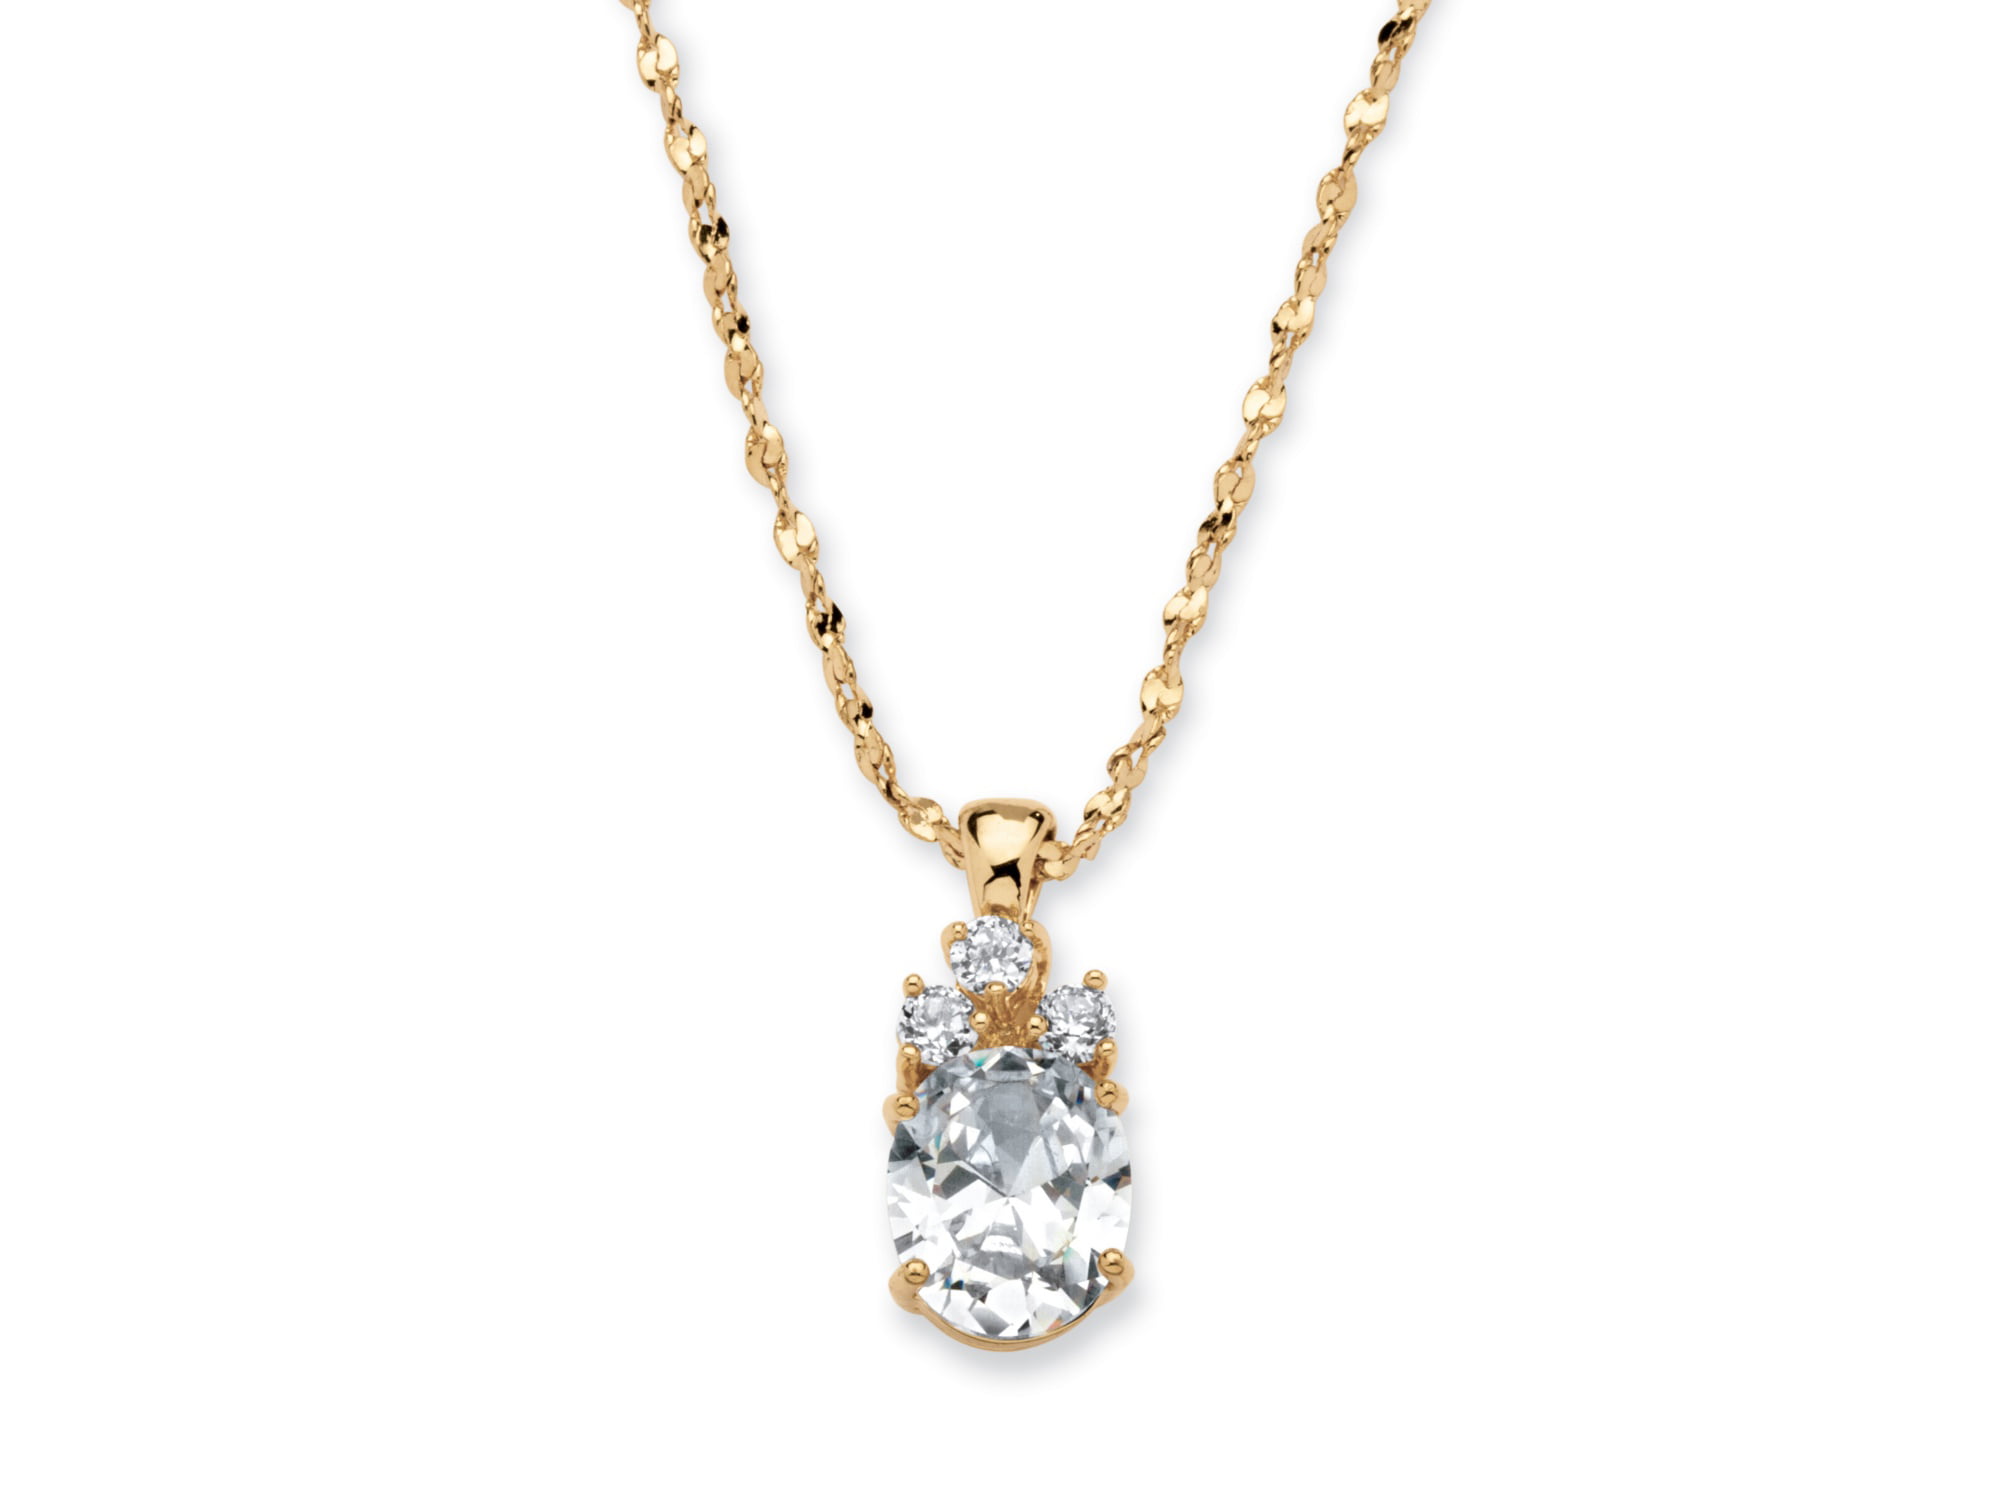 5mm Goldtone Round Cubic Zirconia Solitaire Necklace